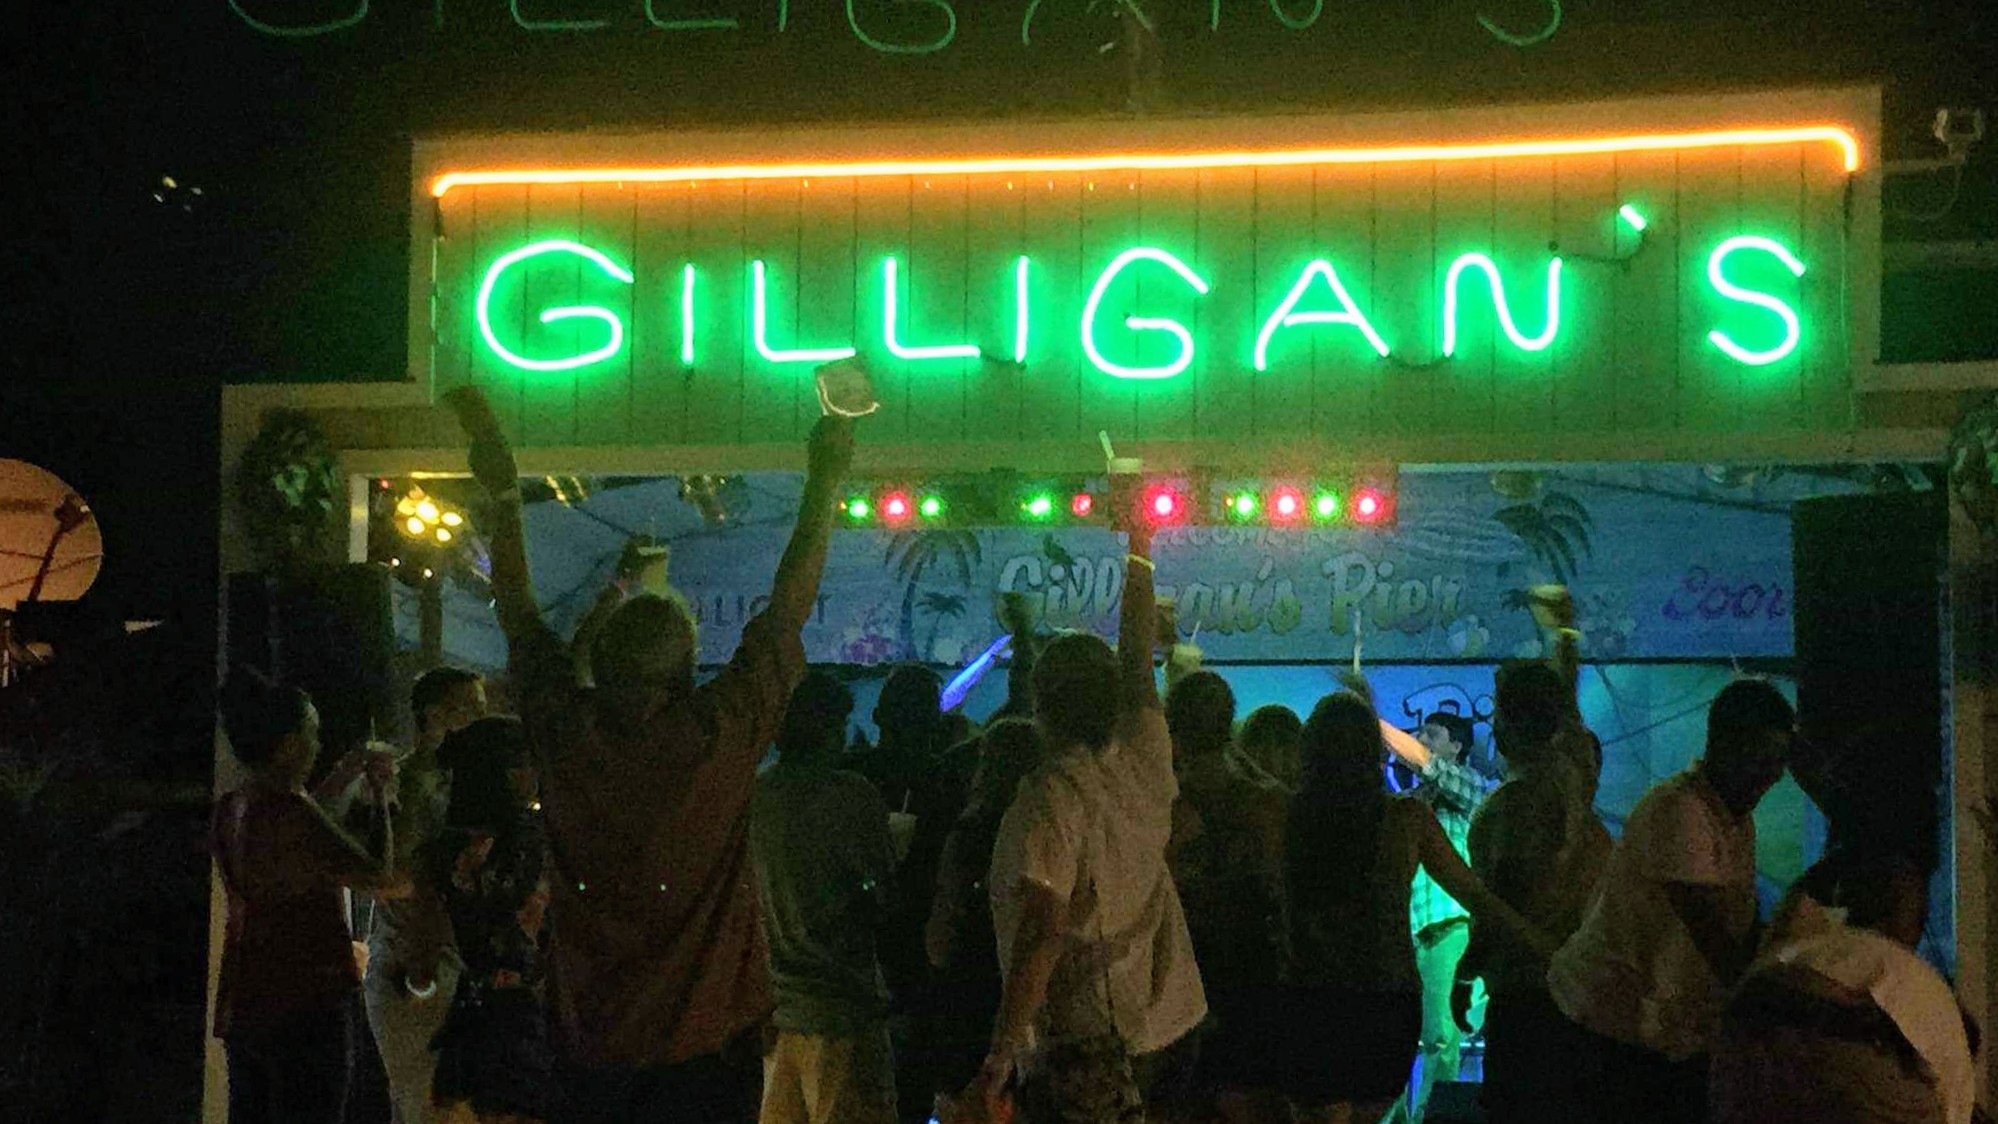 Bad Apples band elcipsed by large crowd cheering at Gilligans Pier